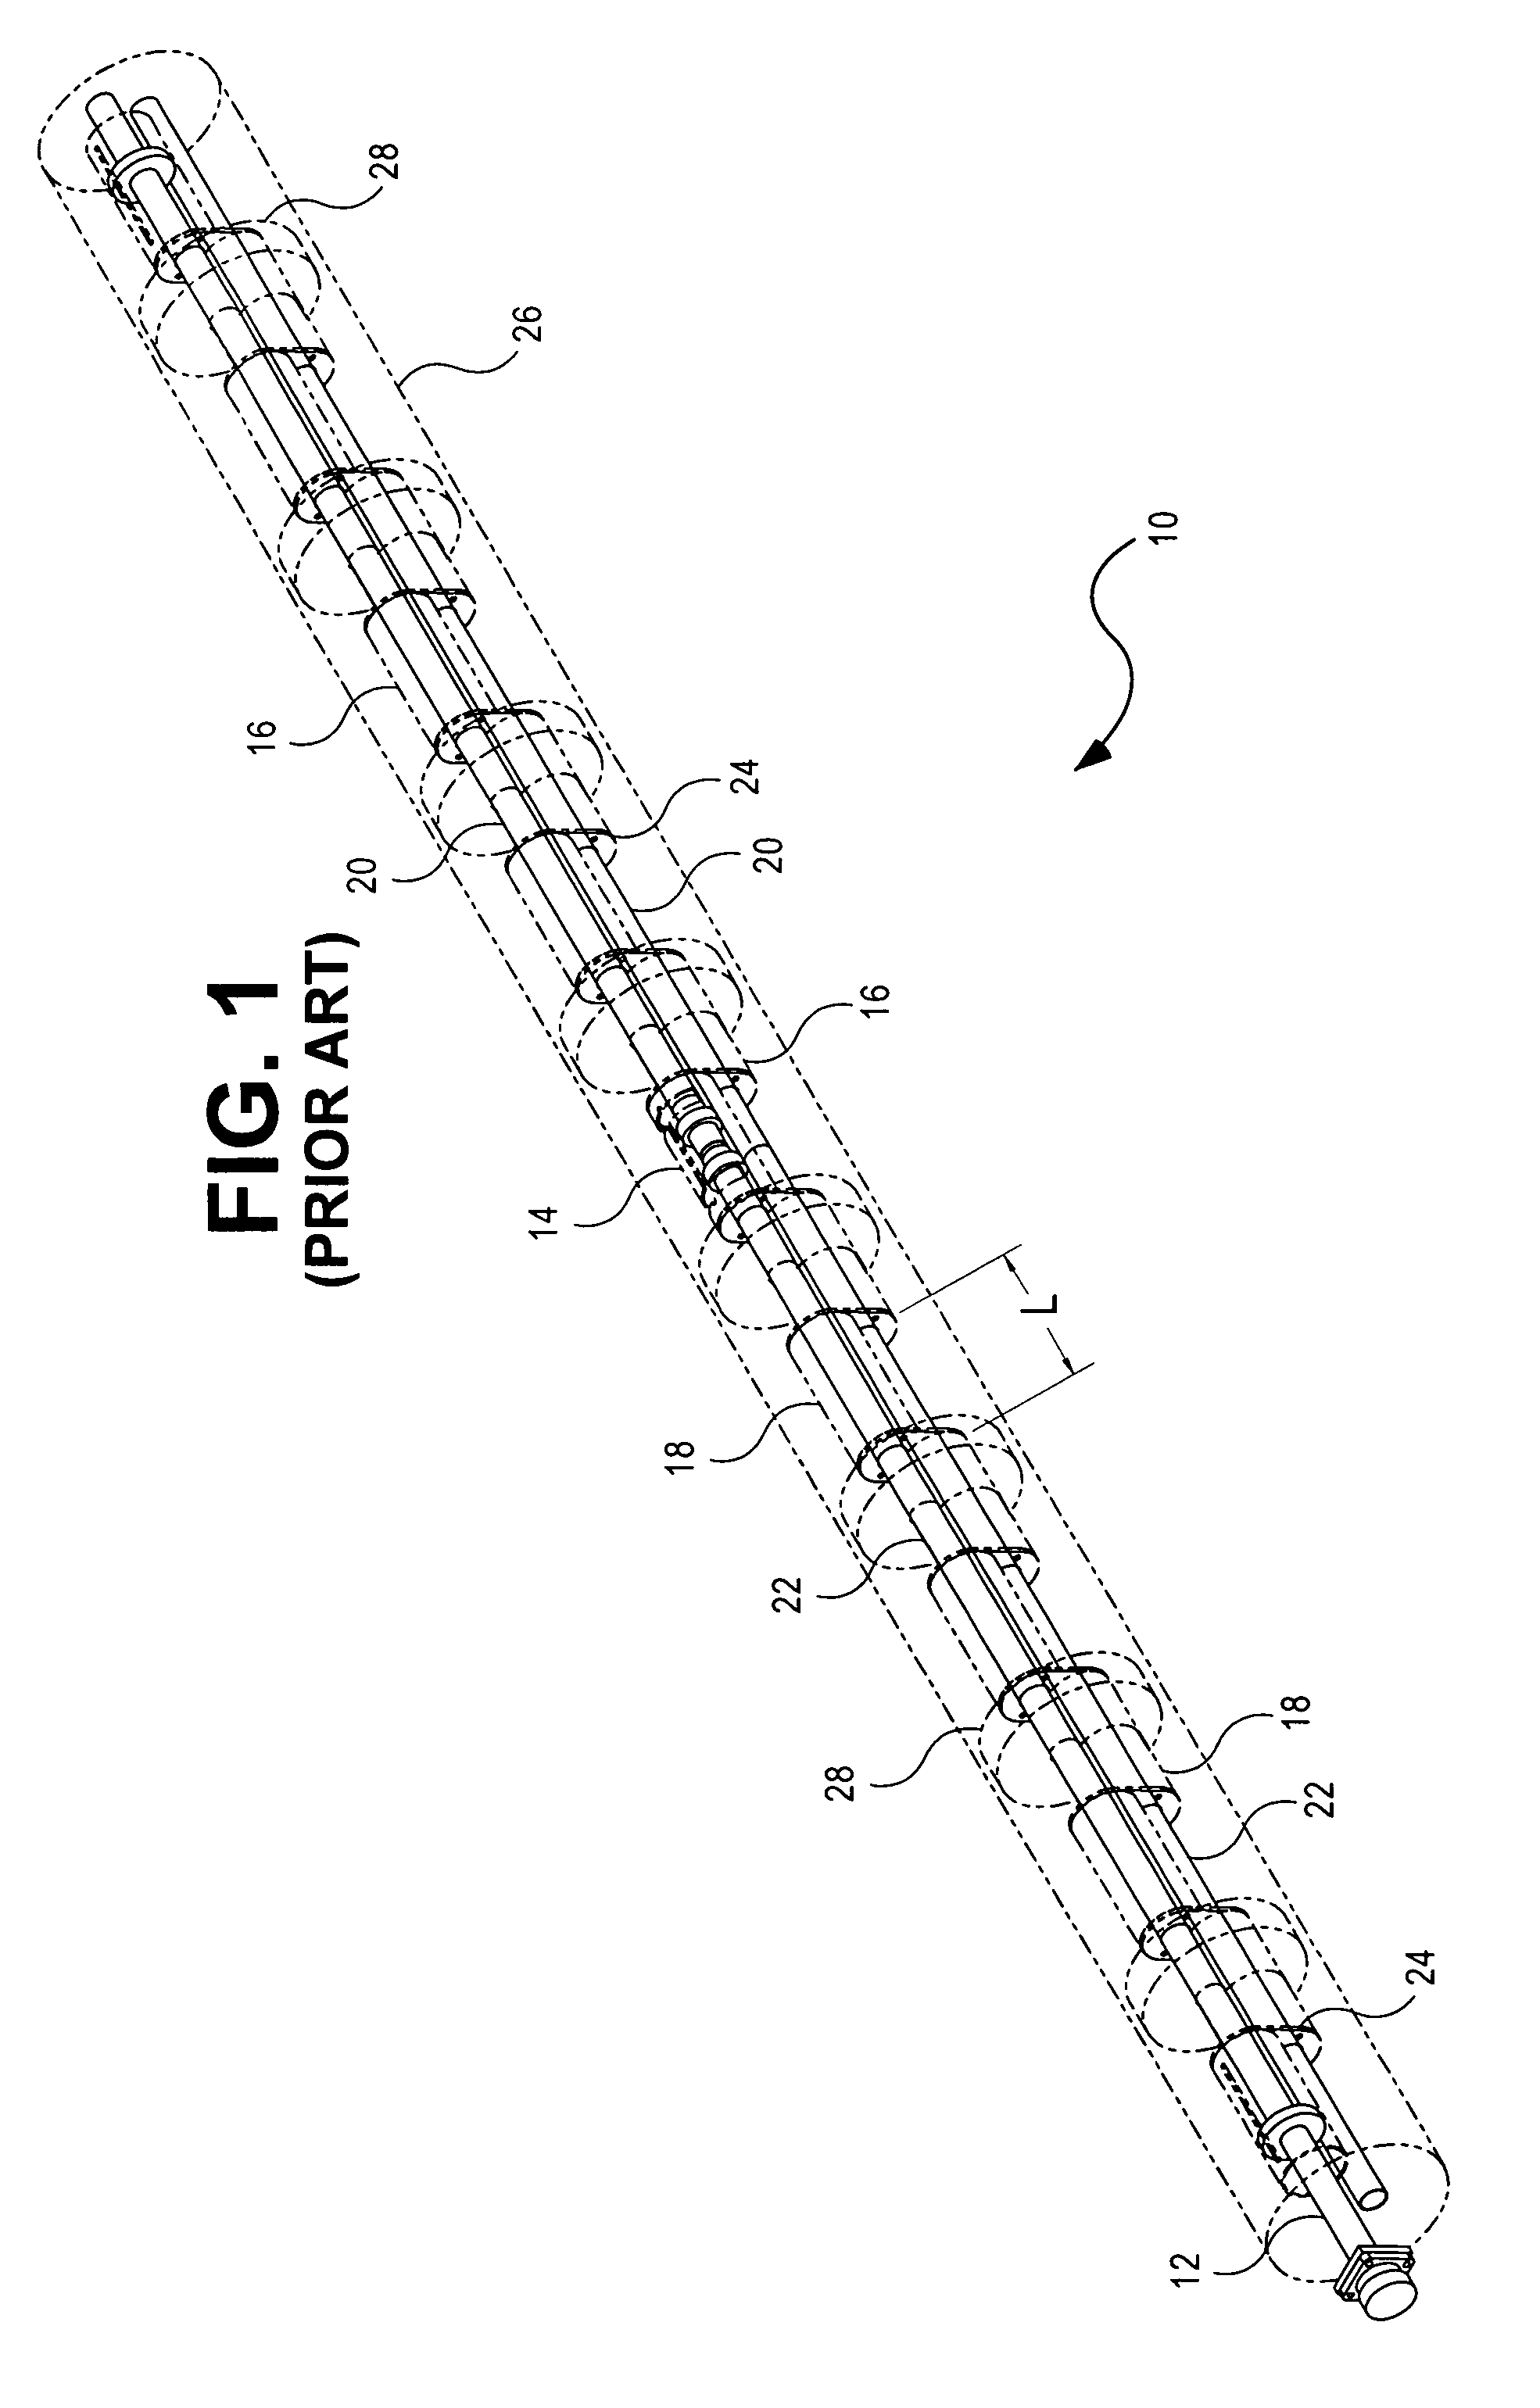 Vertically polarized traveling wave antenna apparatus and method